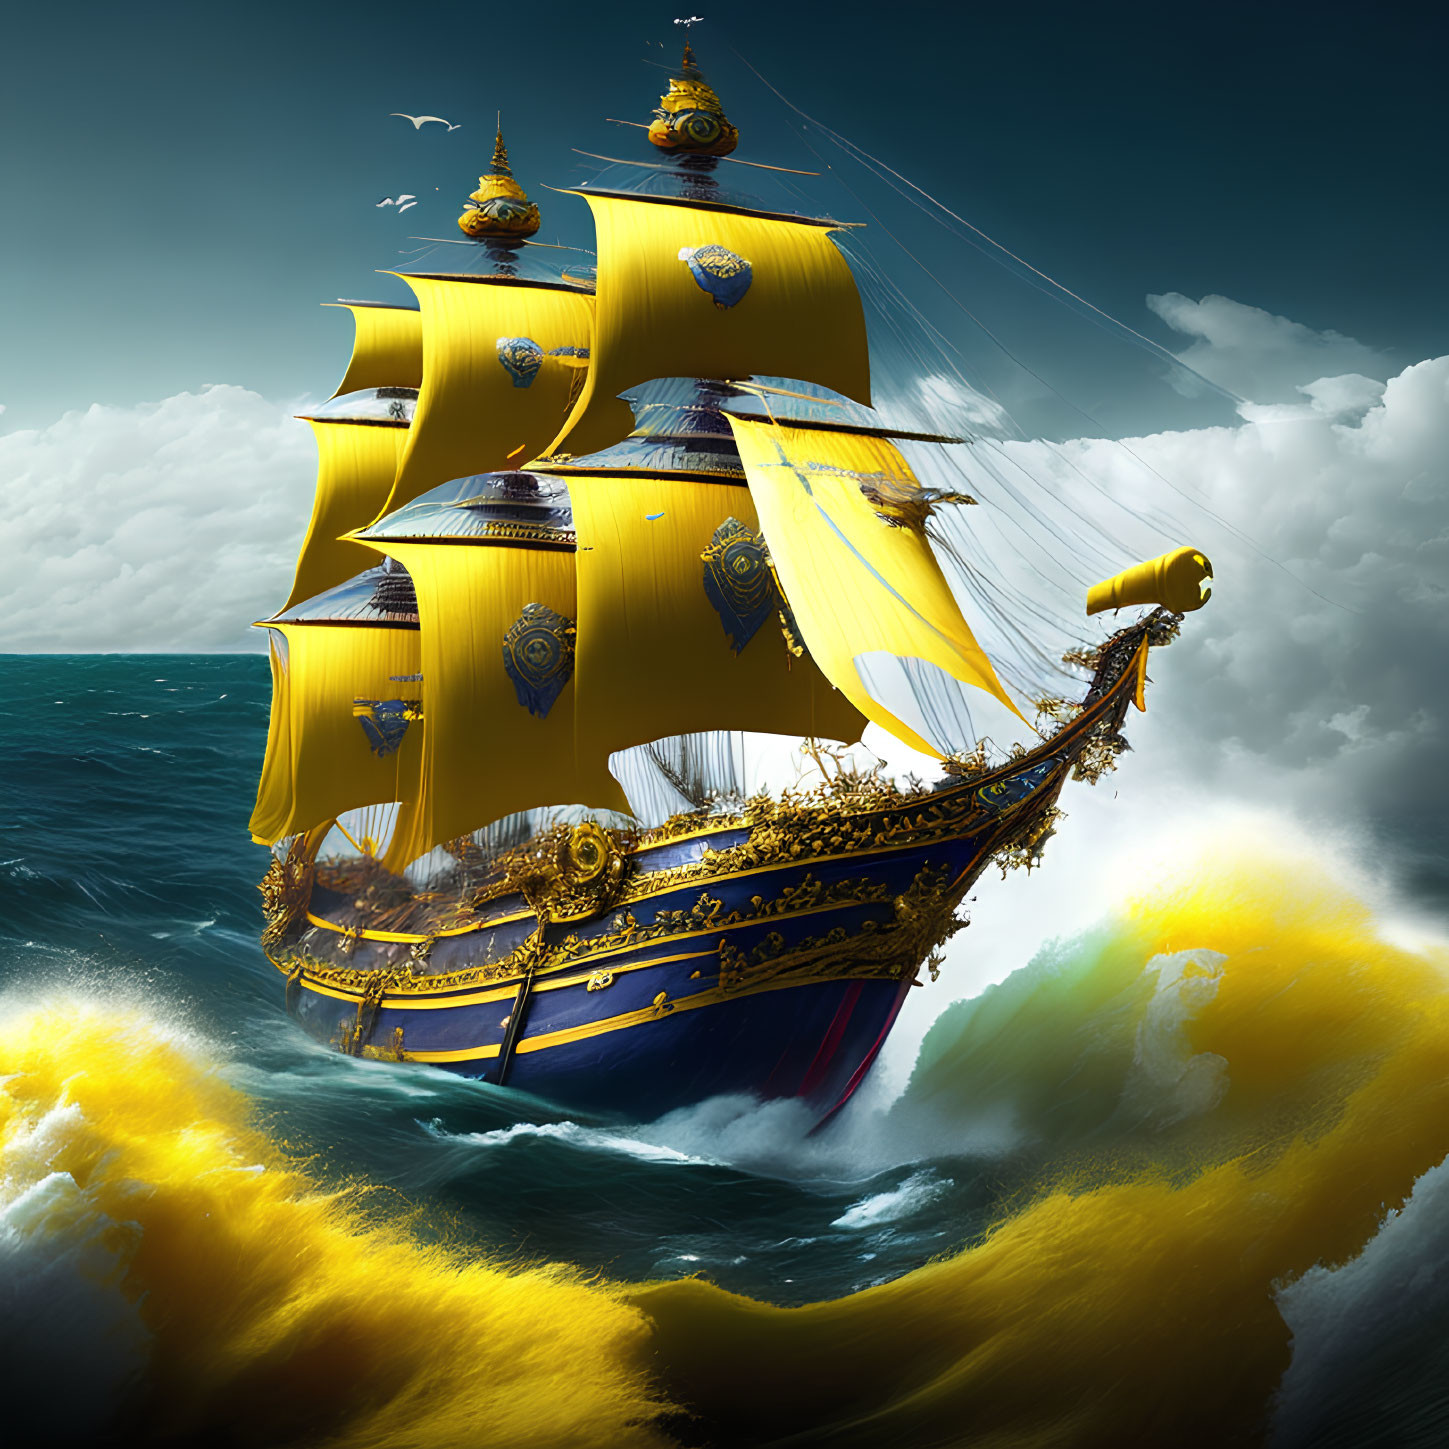 Golden-trimmed sailing ship with yellow sails on high waves and dramatic sky.